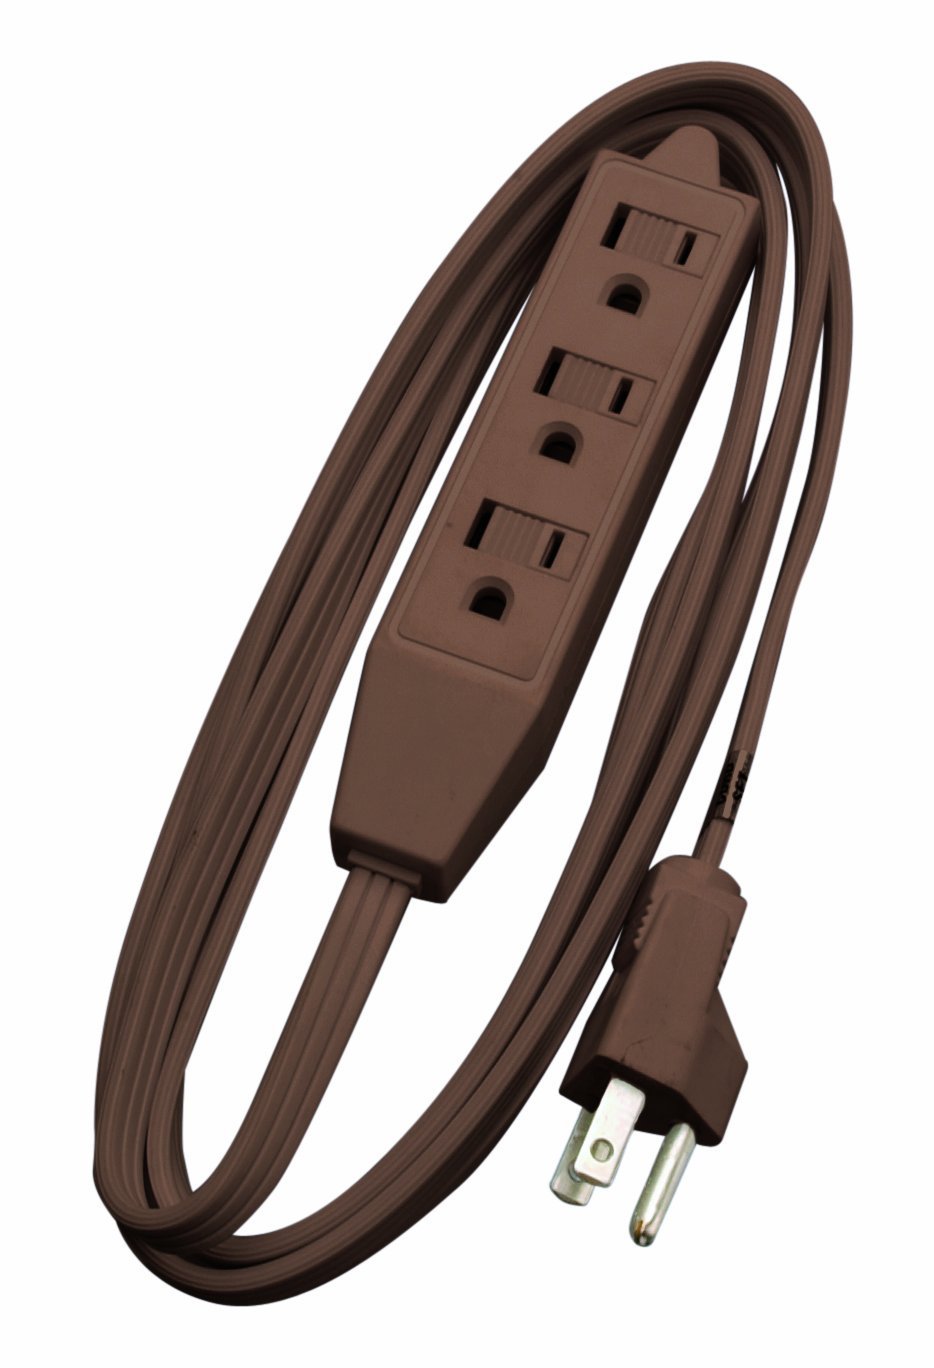 buy extension cords at cheap rate in bulk. wholesale & retail electrical repair kits store. home décor ideas, maintenance, repair replacement parts